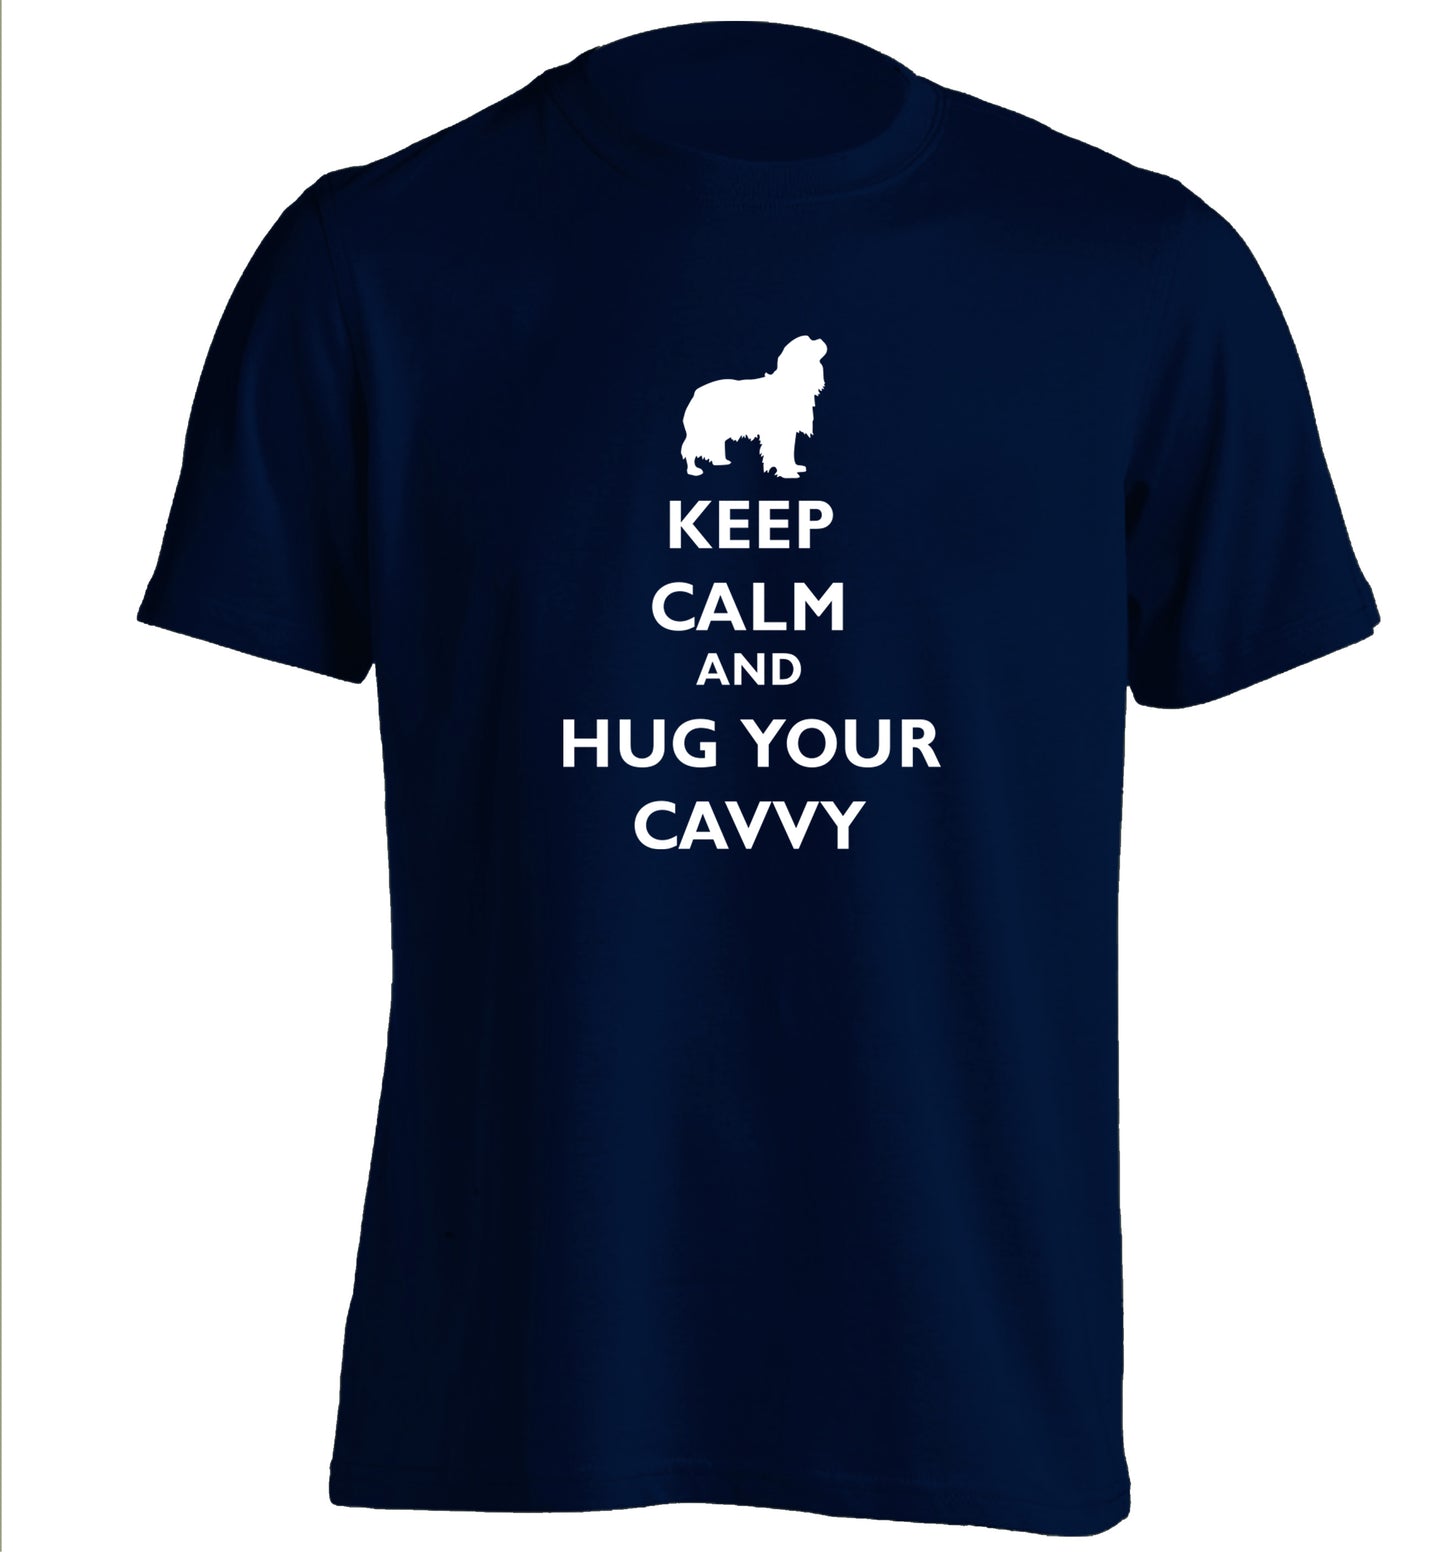 Keep calm and hug your cavvy adults unisex navy Tshirt 2XL